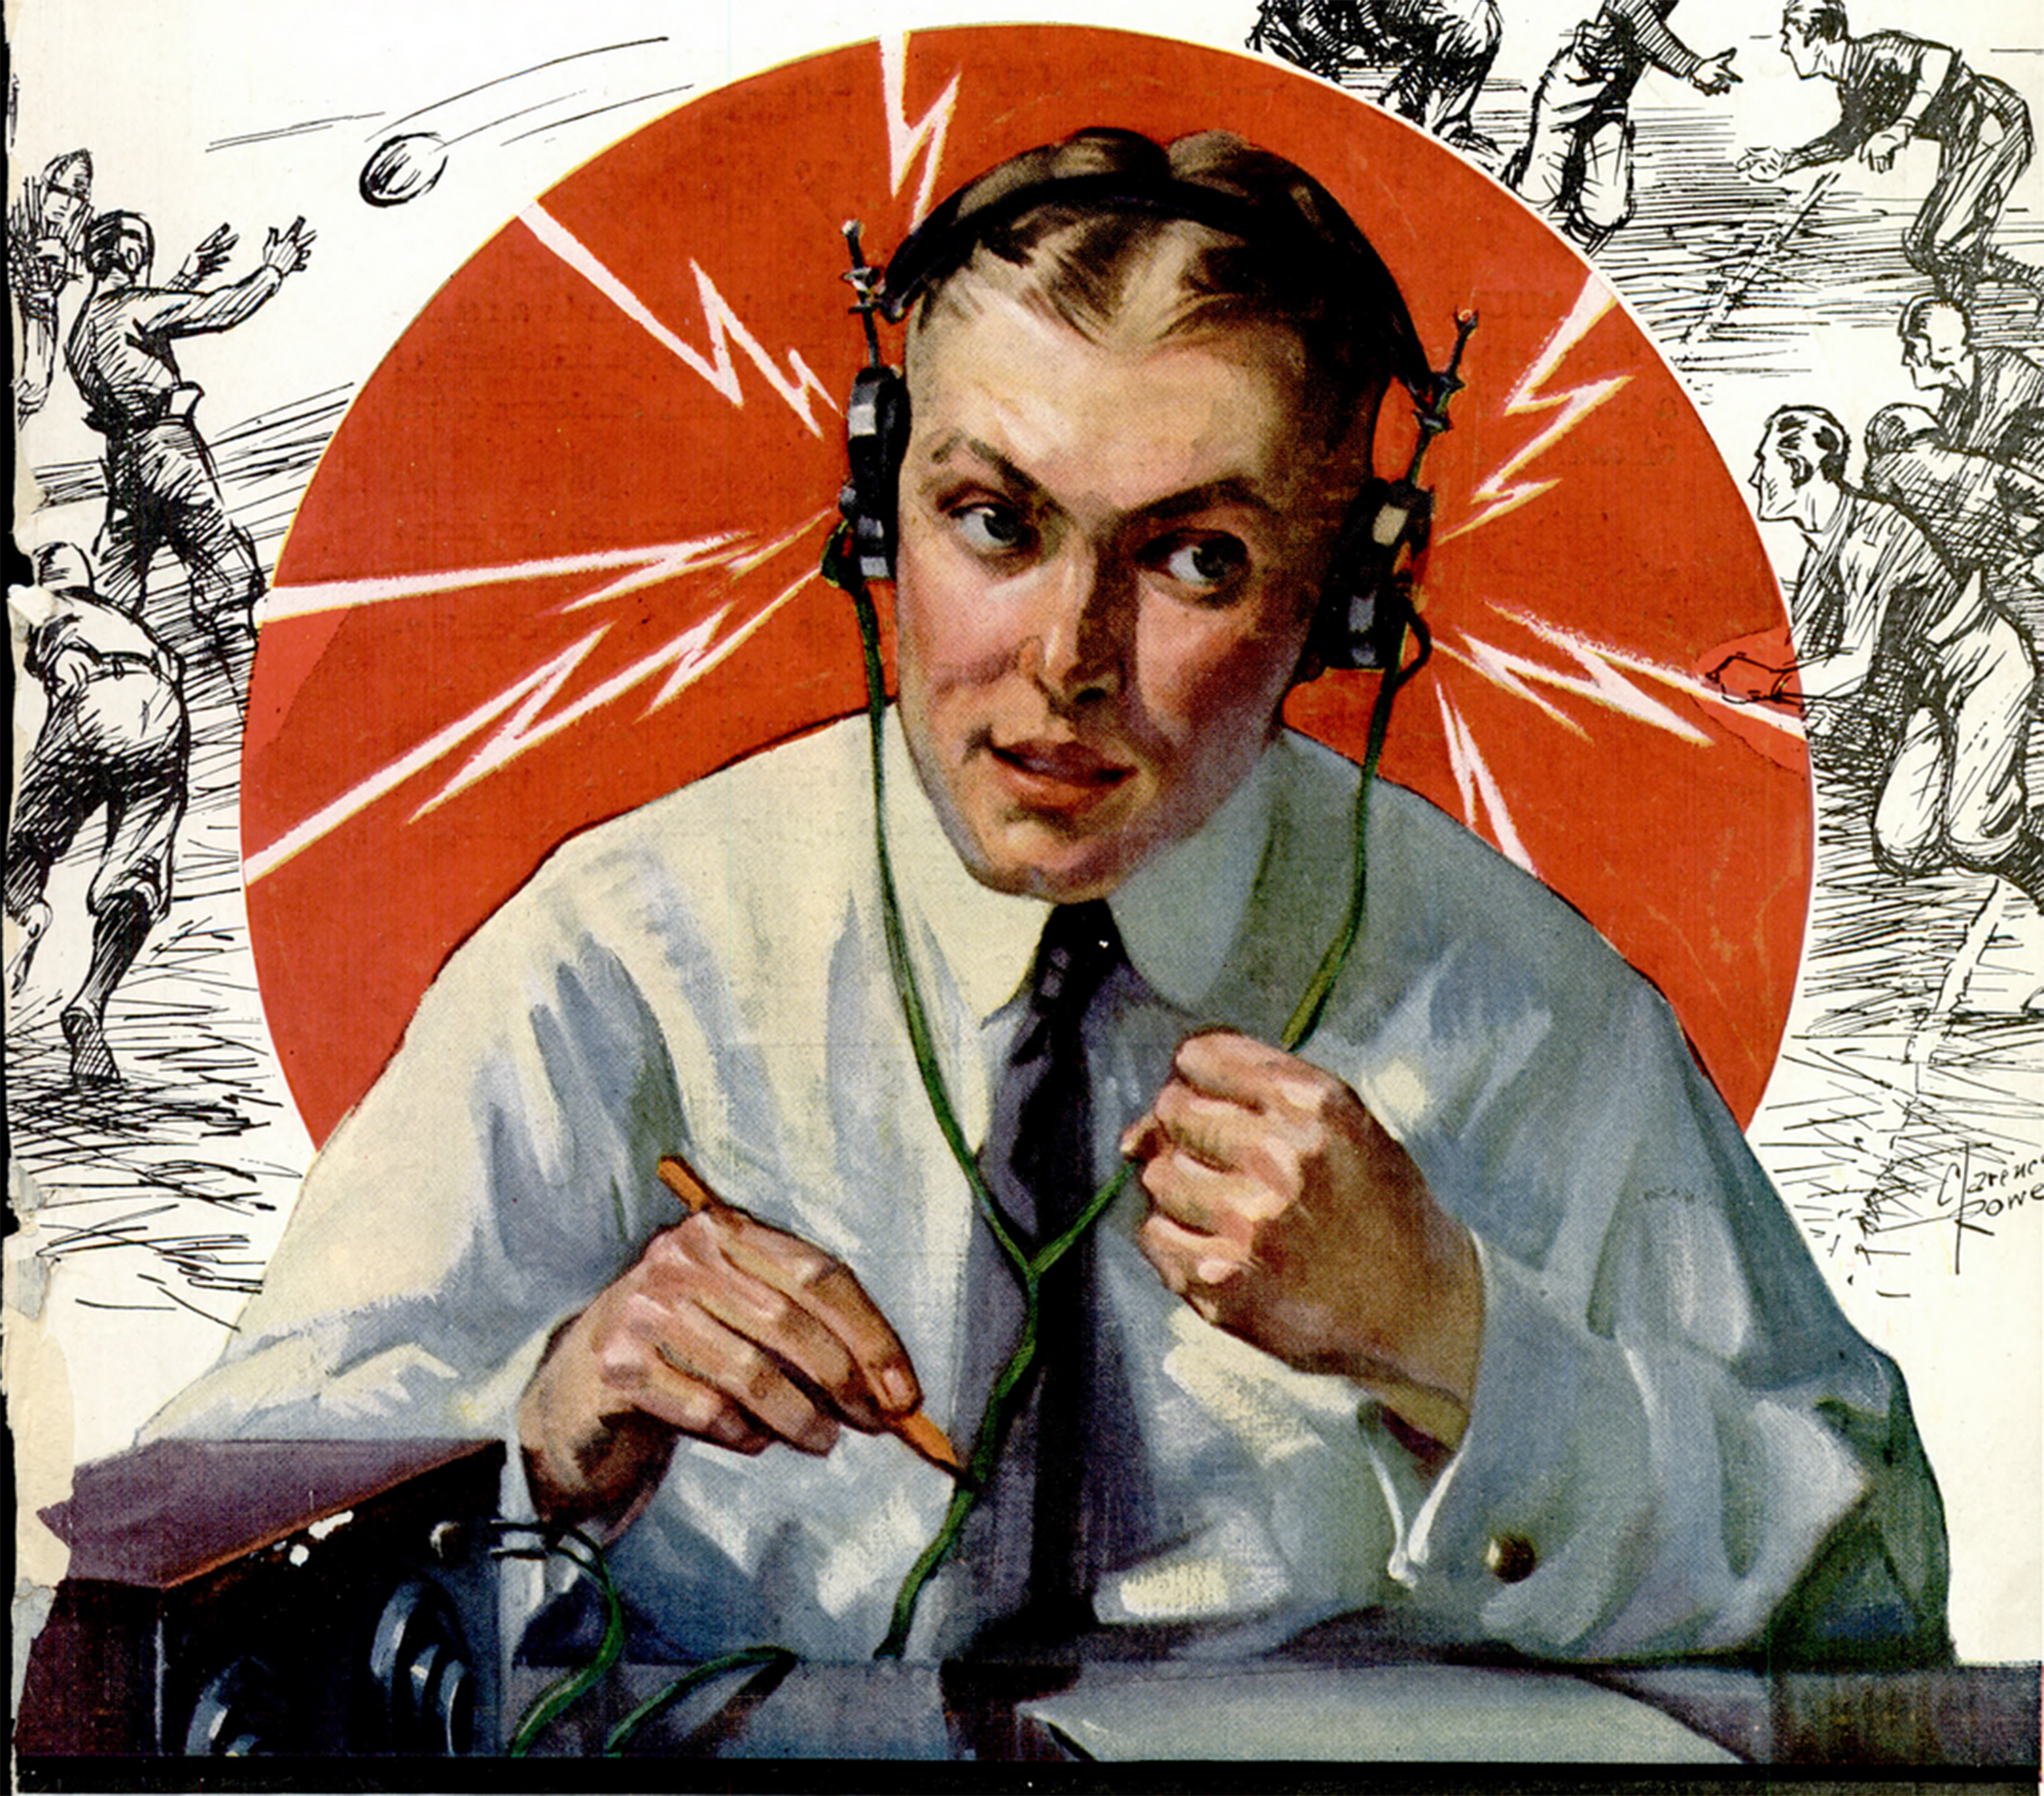 Illustration of a man wearing headphones and listening to a telegraph machine with sounds represented by lightning bolts in the background 